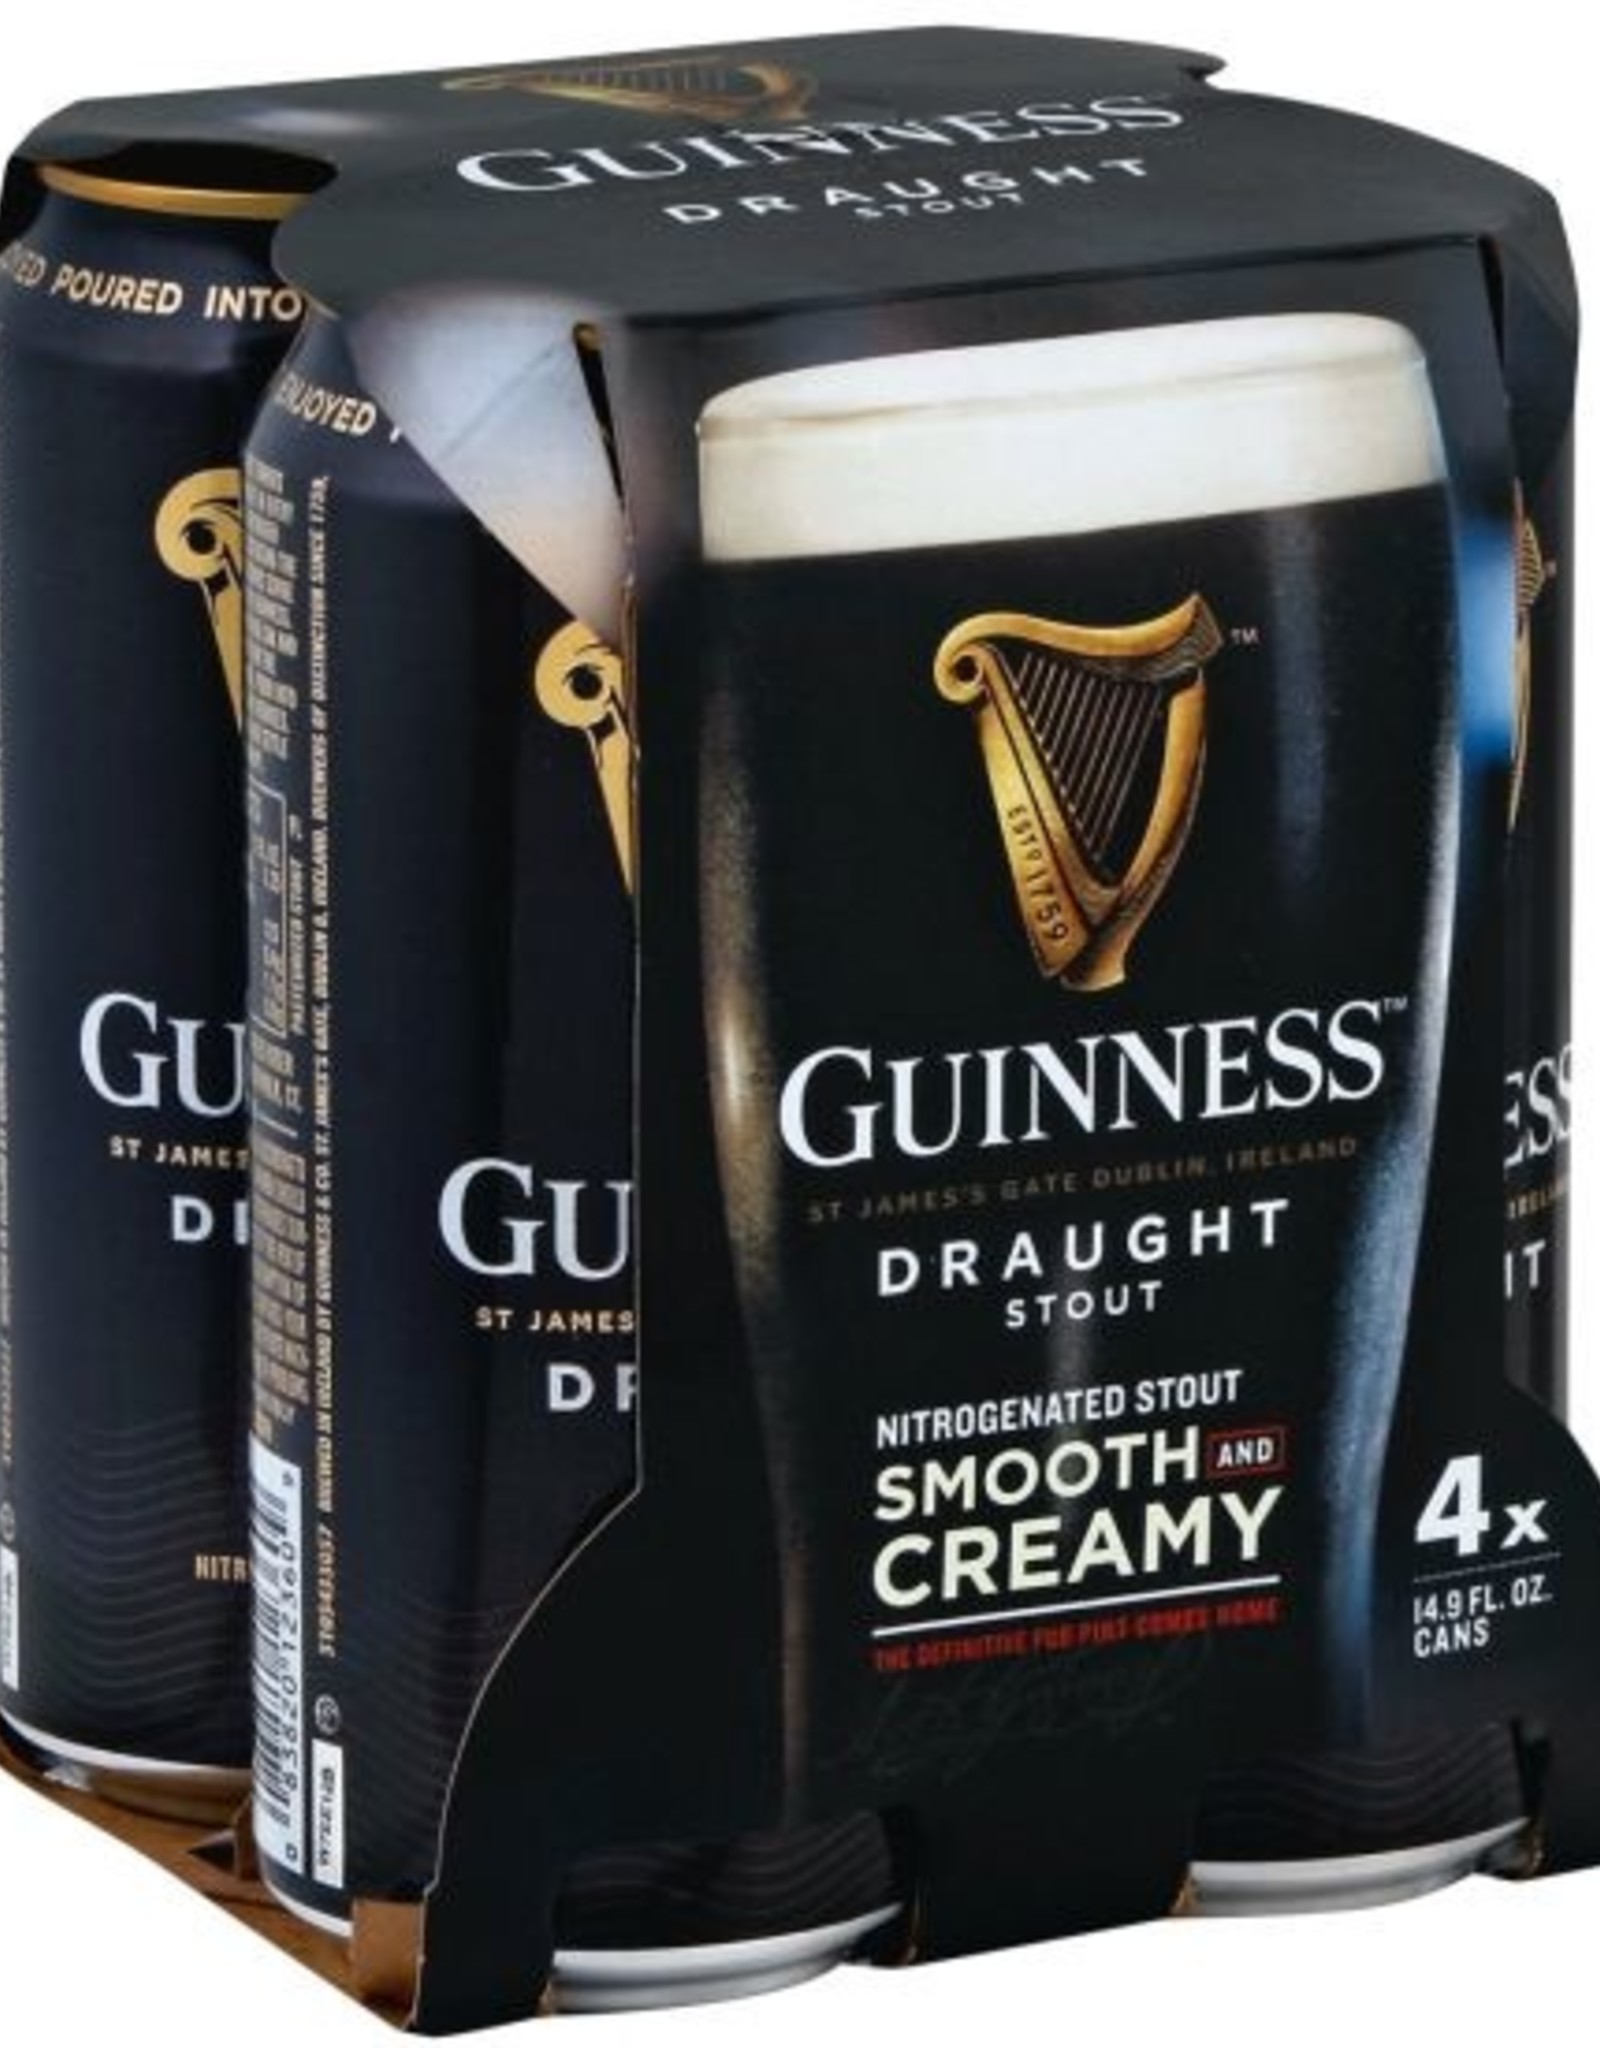 Guinness Draught Stout 4x14.9 oz cans